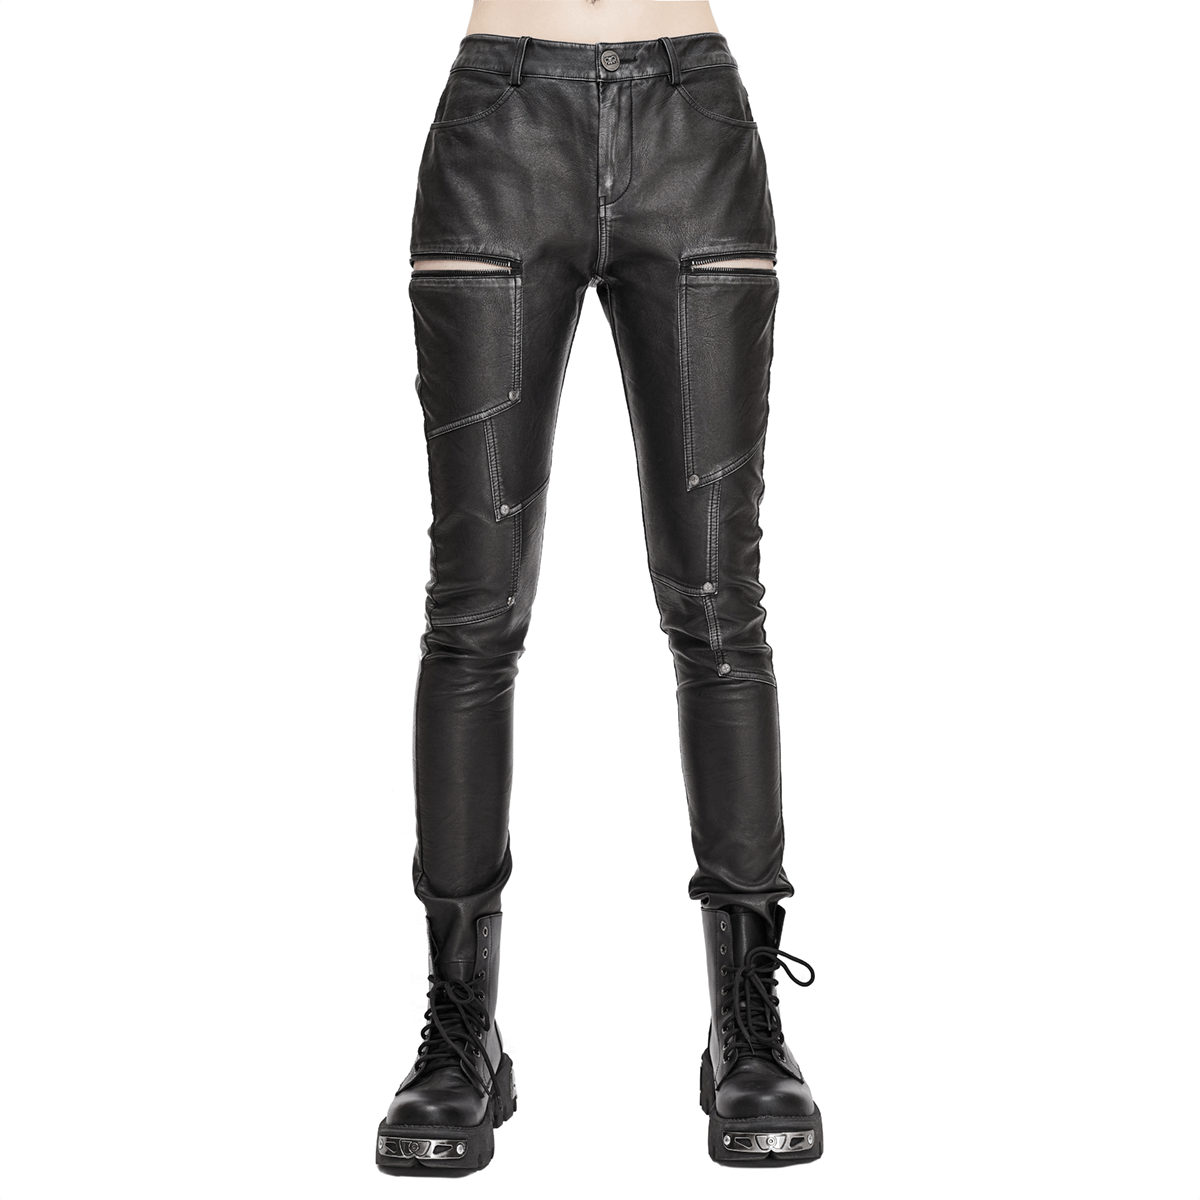 Women's Gothic Faux Leather Zipper Fitted Pants / Punk Style Mid Waist Slim Trousers Pants - HARD'N'HEAVY